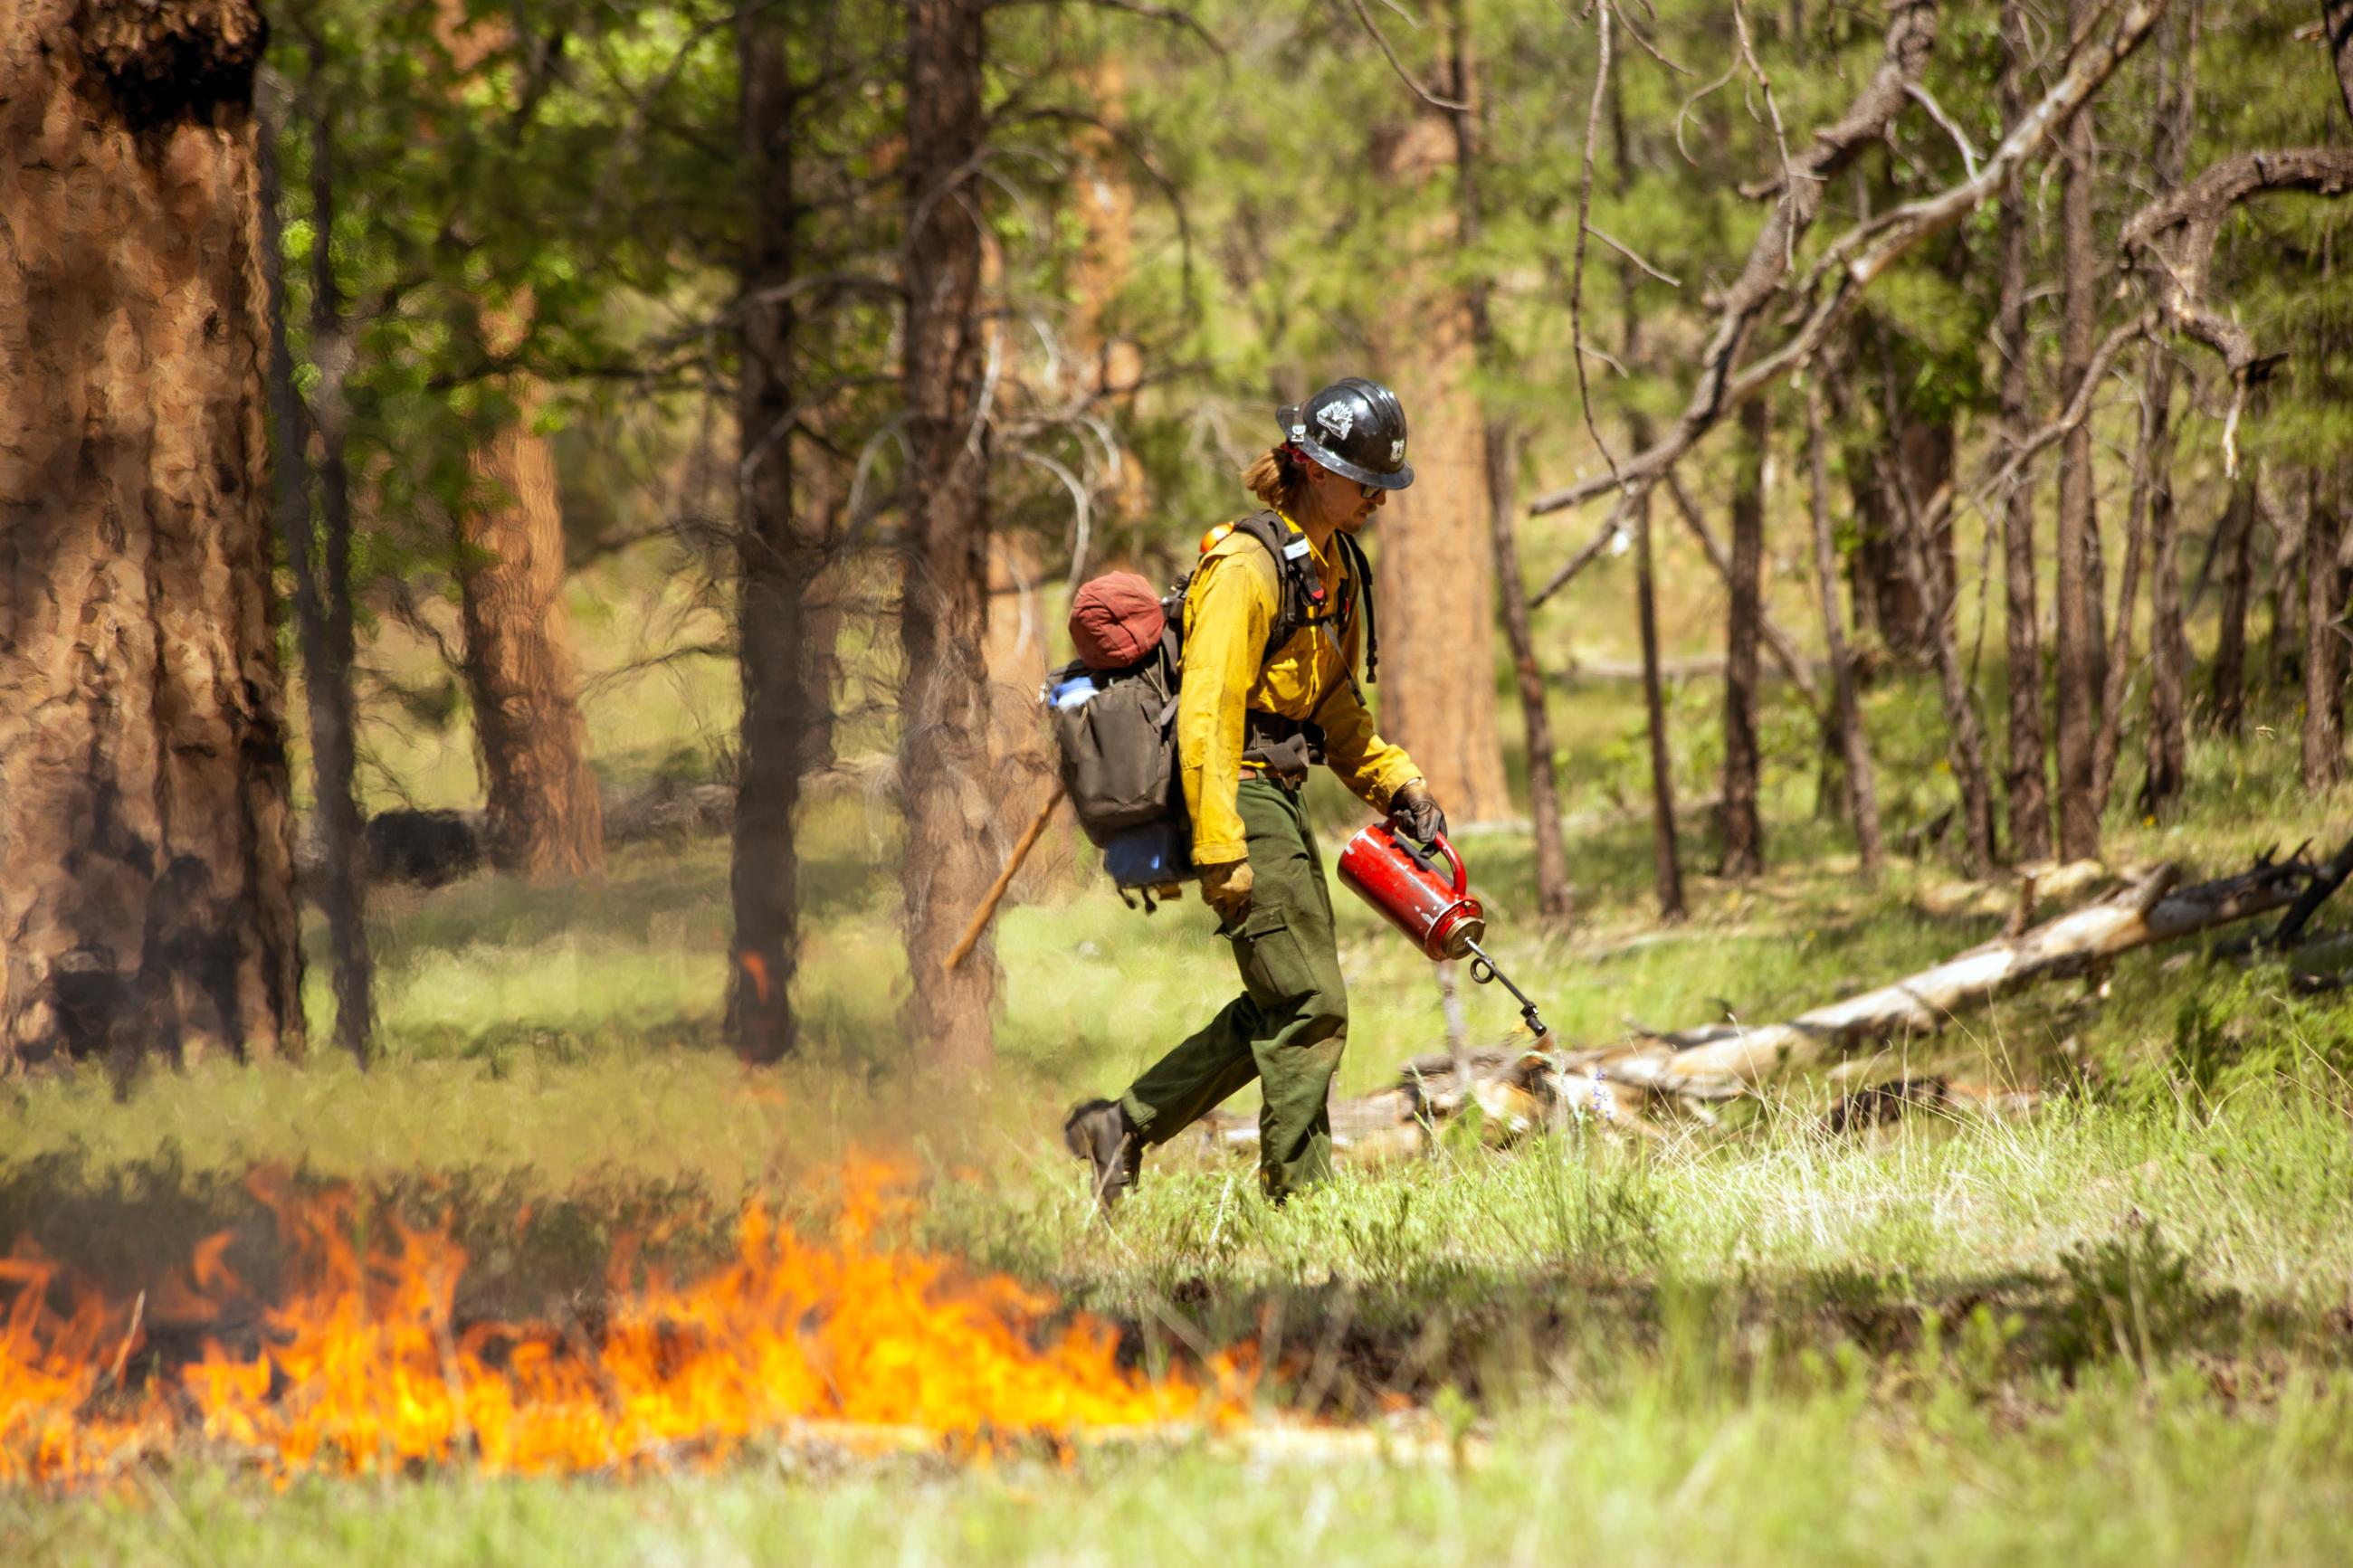 A firefighter wearing a yellow Nomex shirt carries a drip torch to spread fire across a forest floor.